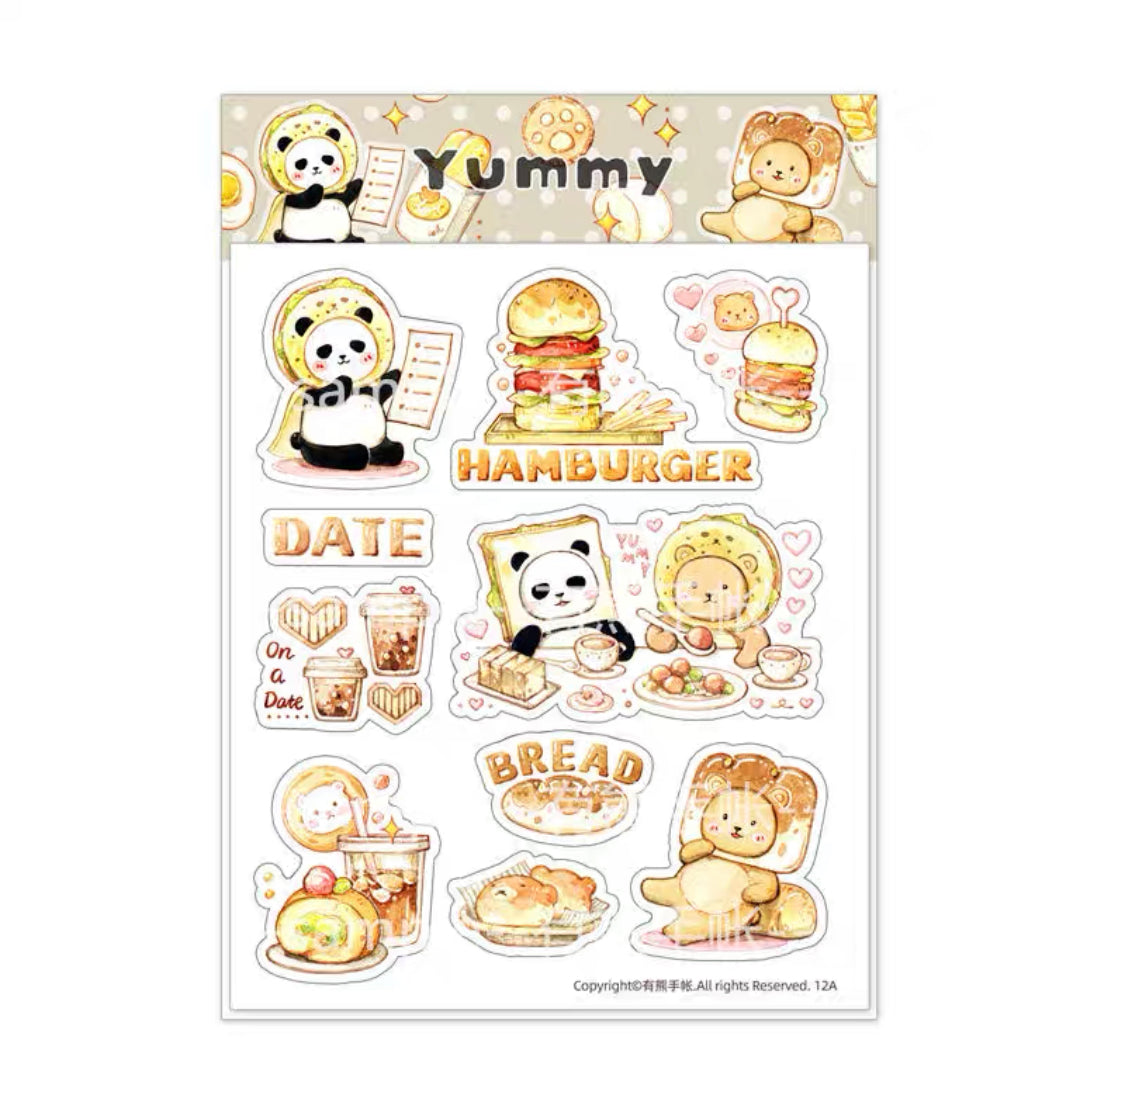 Ever&Ein yummy and involution washitape and sticker pack